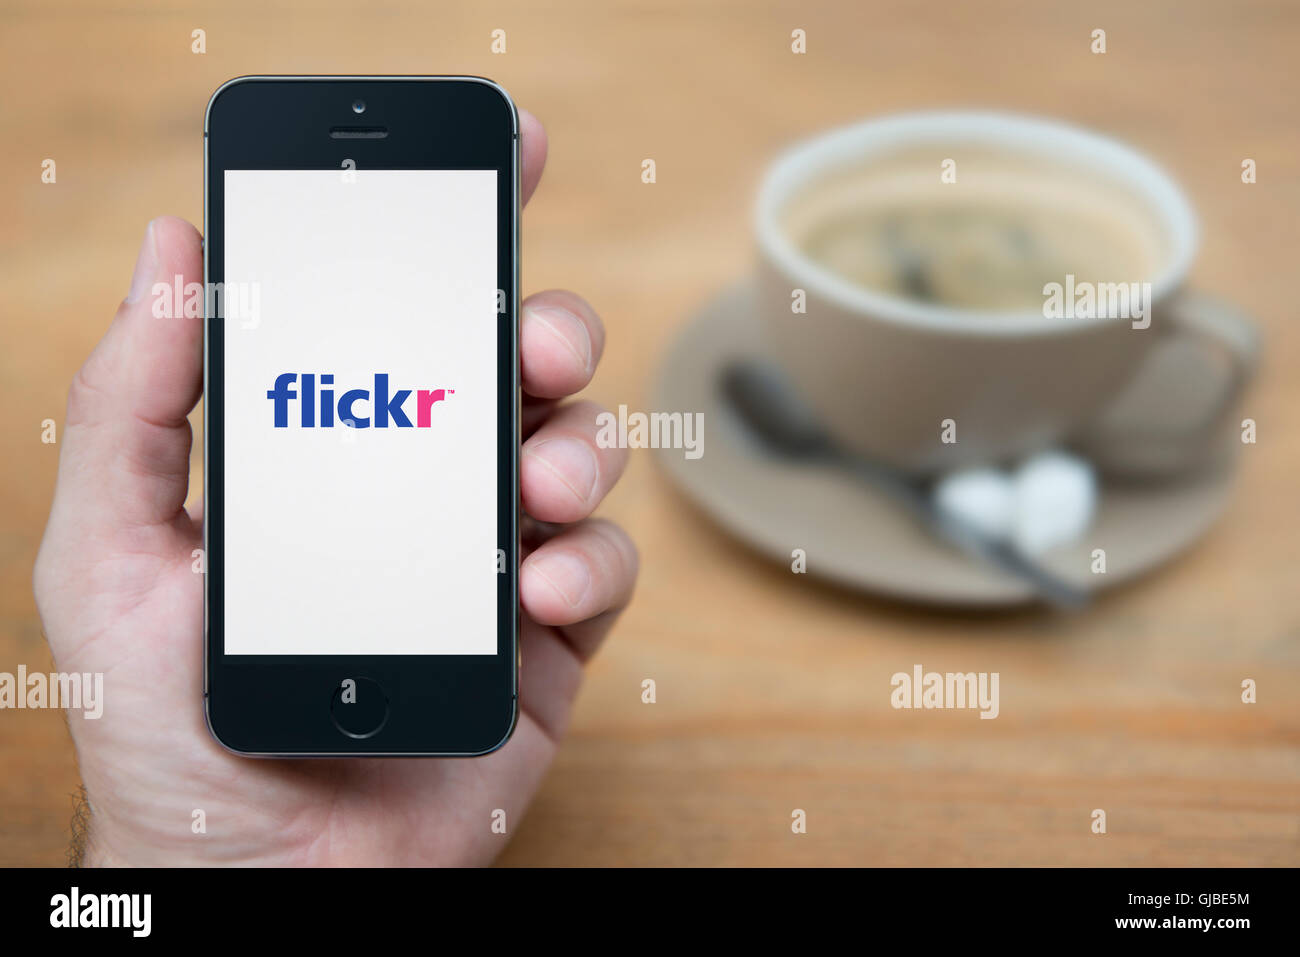 A man looks at his iPhone which displays the Flickr logo, while sat with a cup of coffee (Editorial use only). Stock Photo